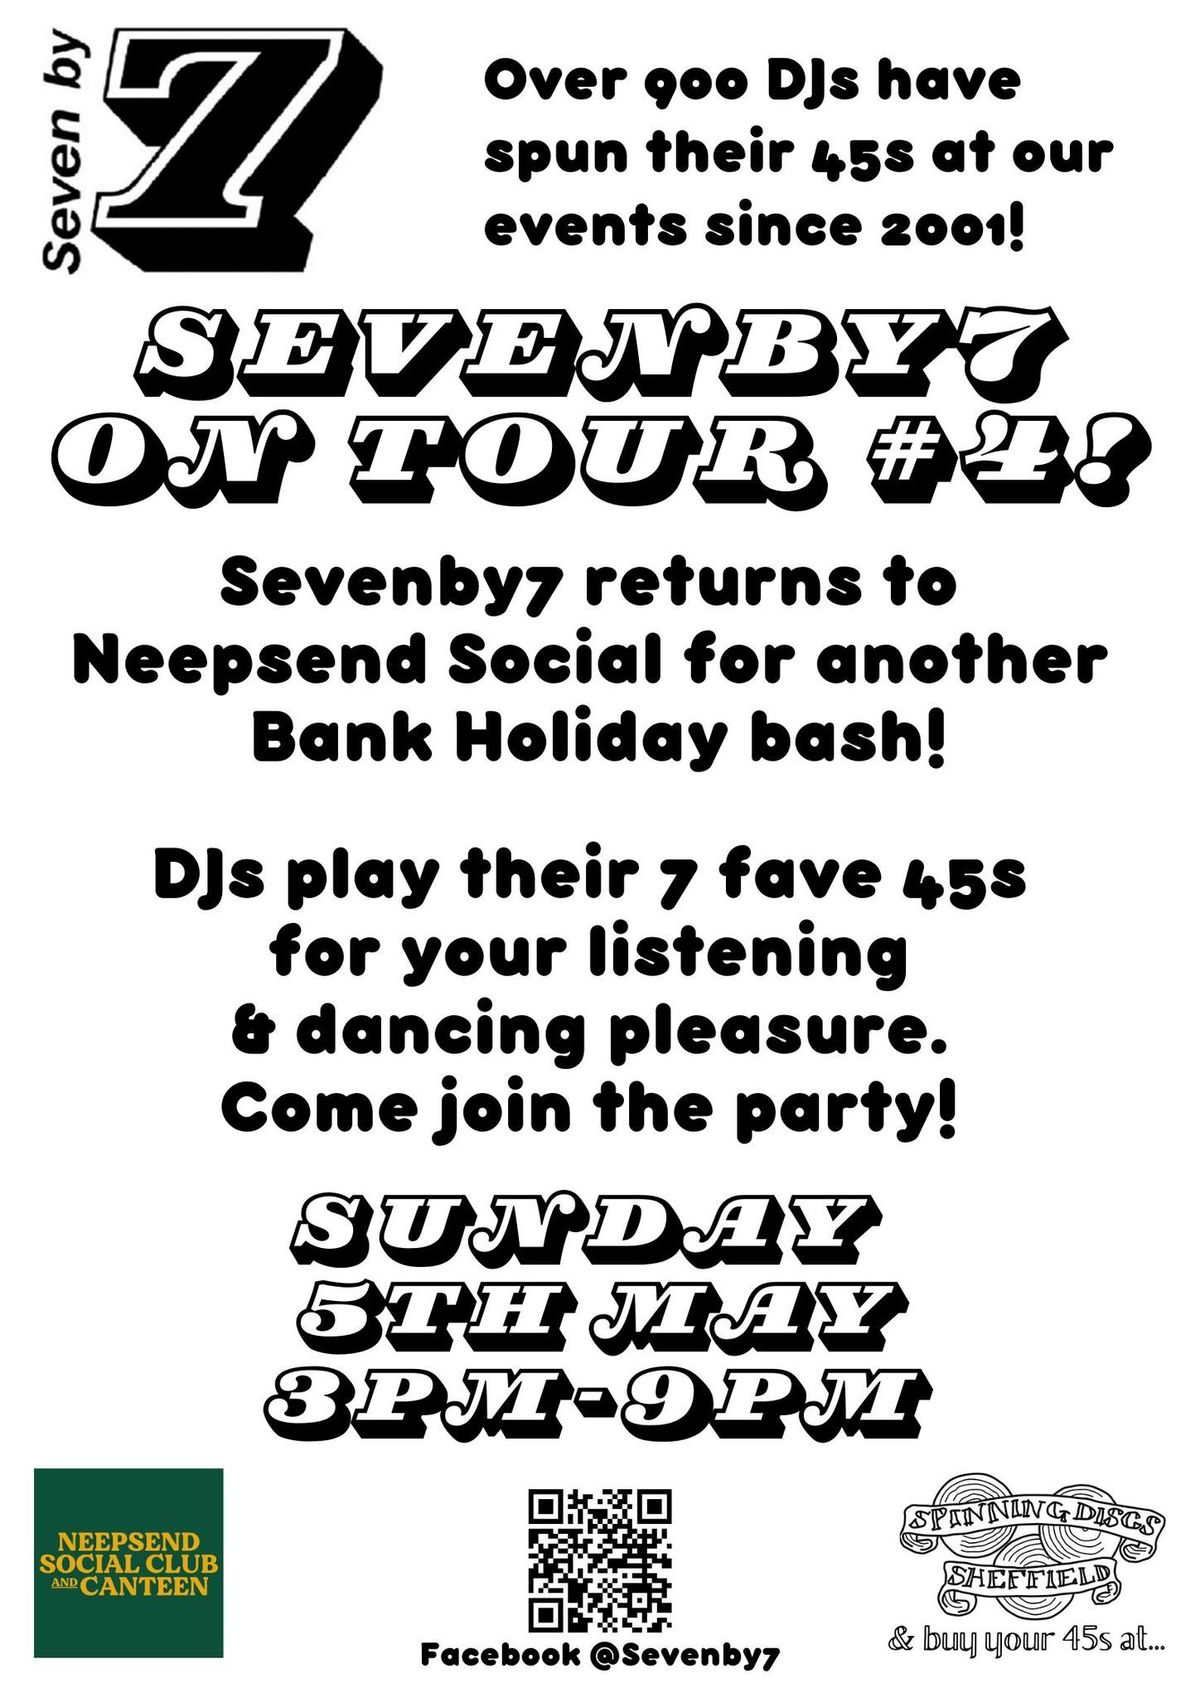 Sevenby7 on Tour #4, Sunday 5th May, Neepsend Social Club.